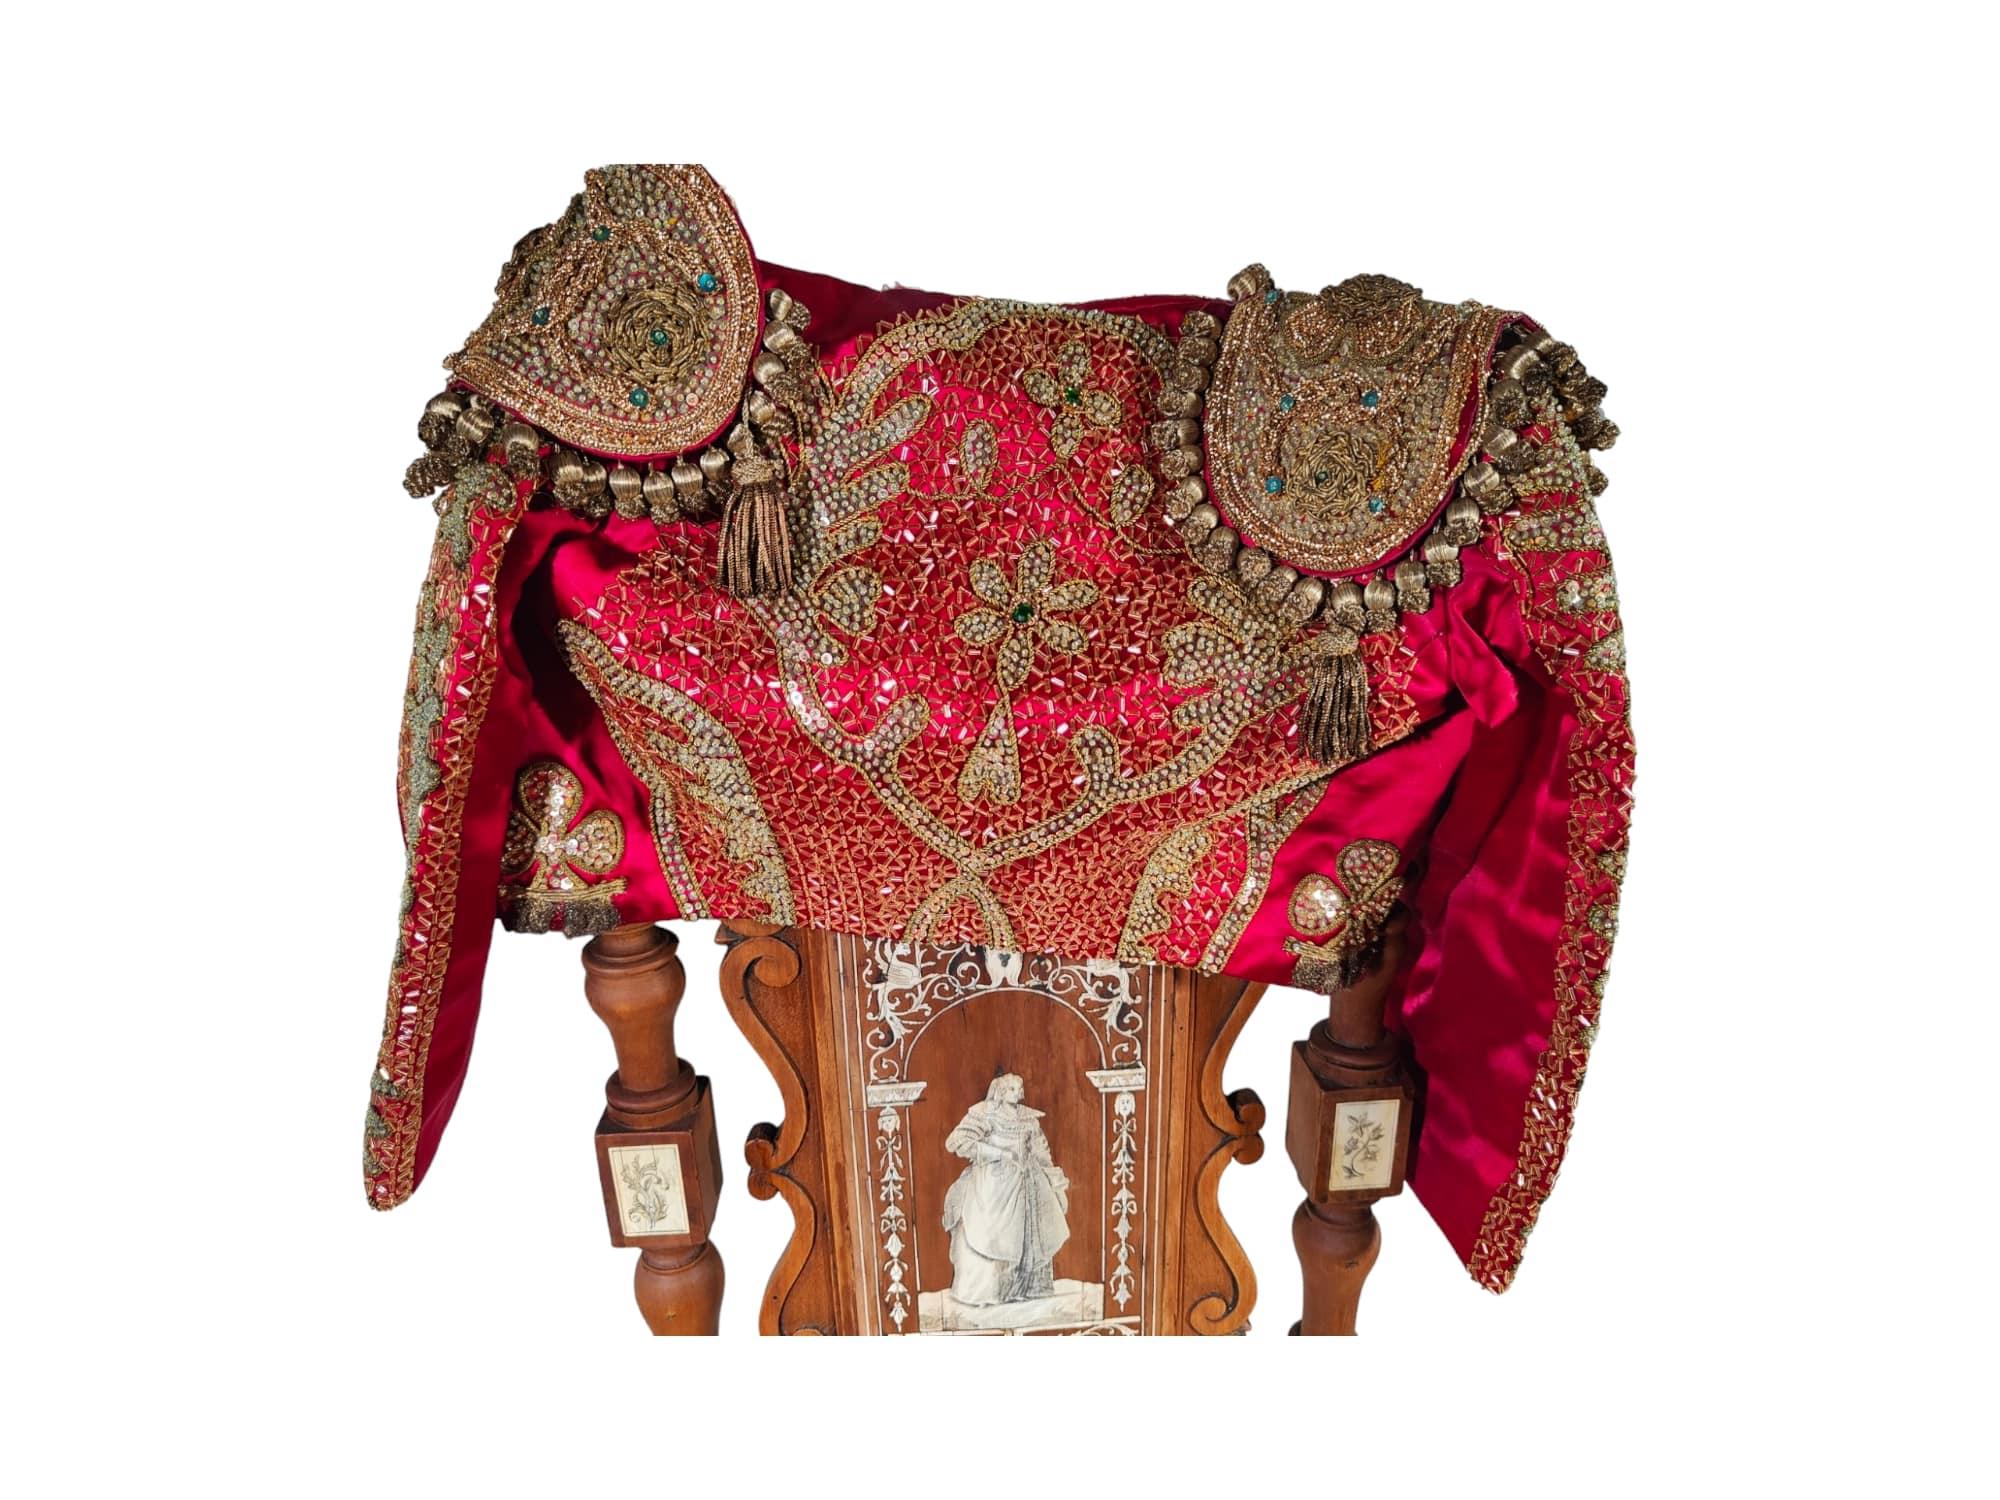 Bullfighter Costume for Children from the 20th Century - A Gem of Children's Bul For Sale 2